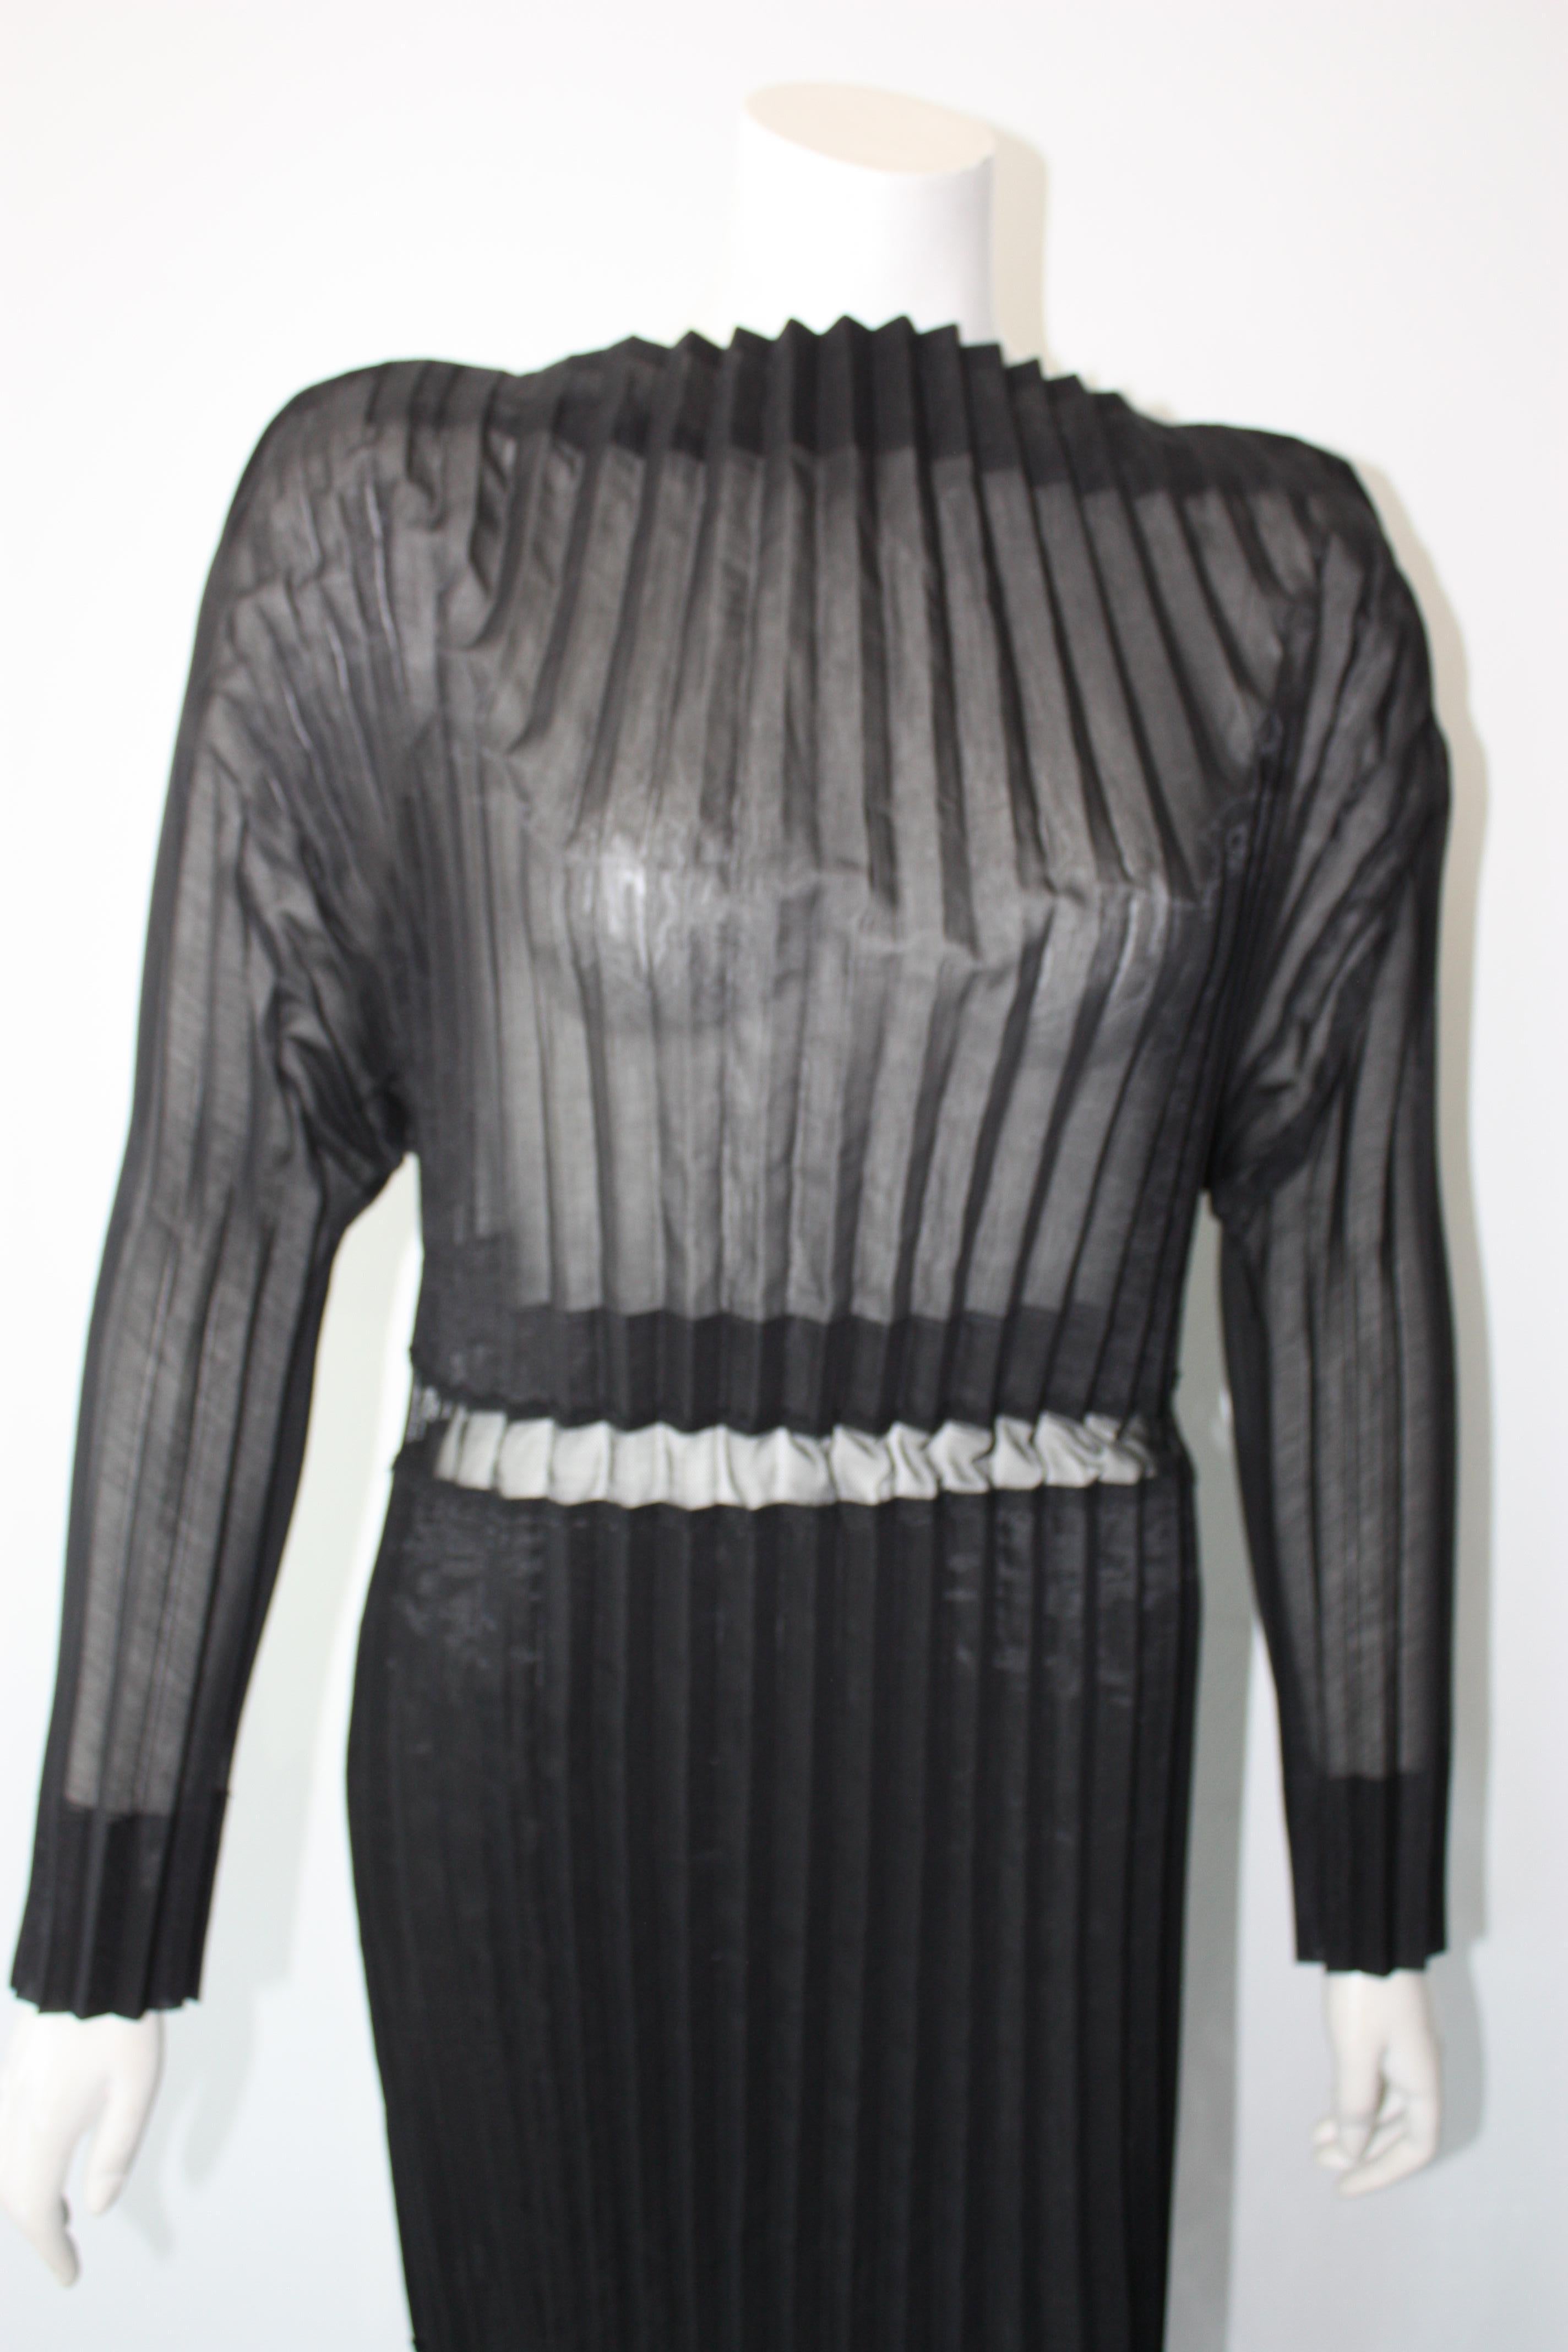 Stella McCartney Black Midi Sheer and Pleated Lace Dress Size 42 For Sale 2